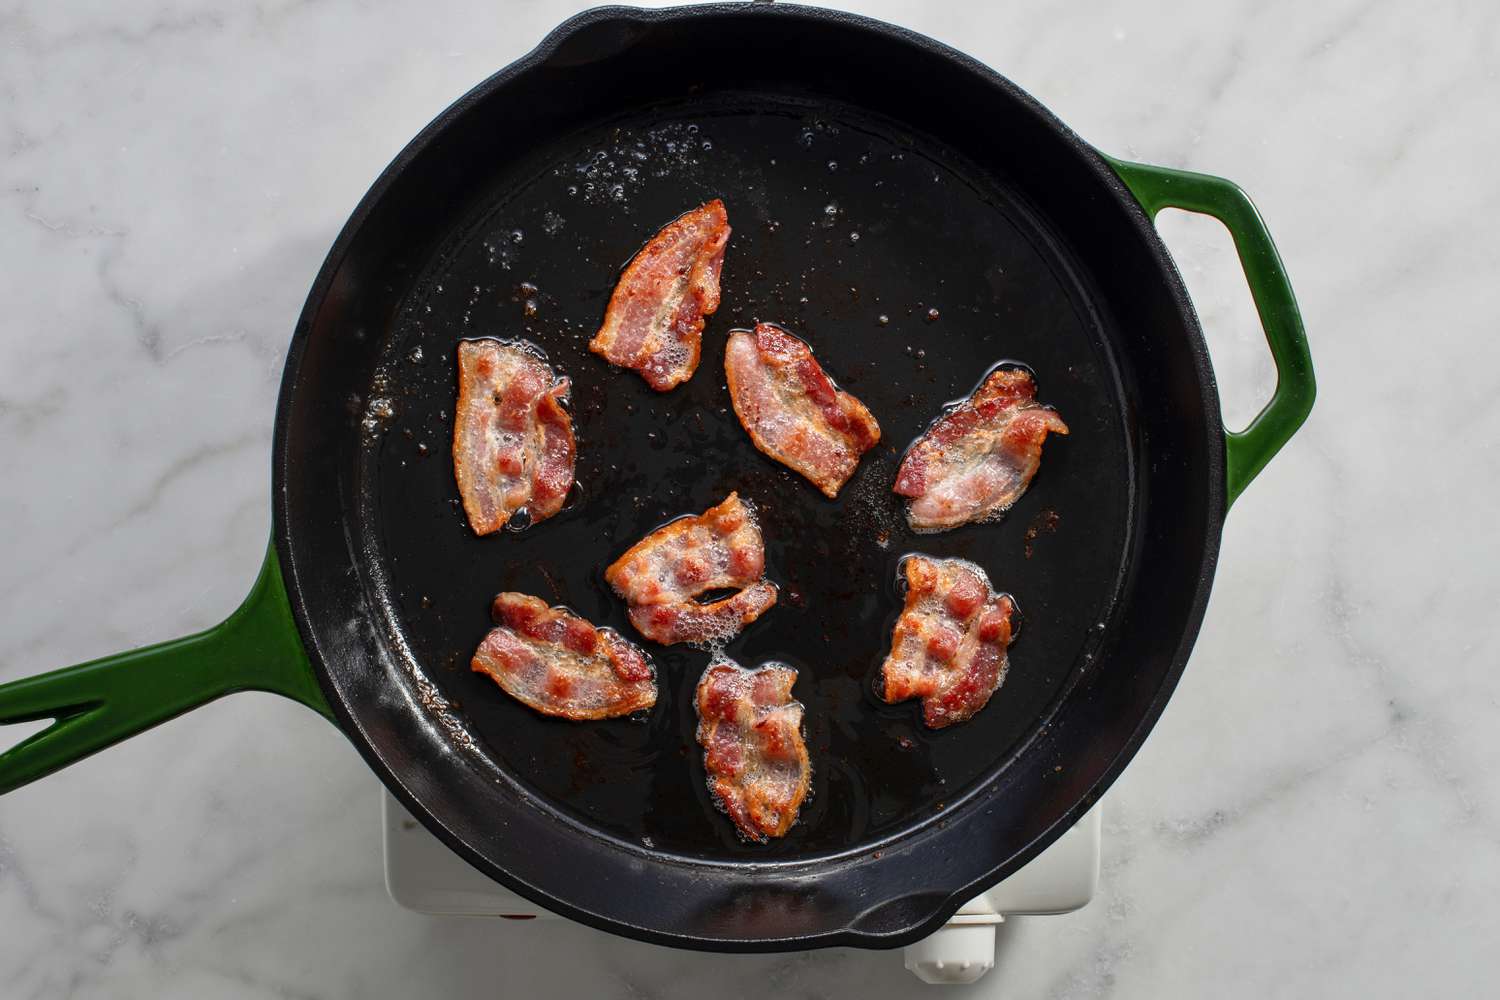 Slices of bacon cooking in a cast iron skillet